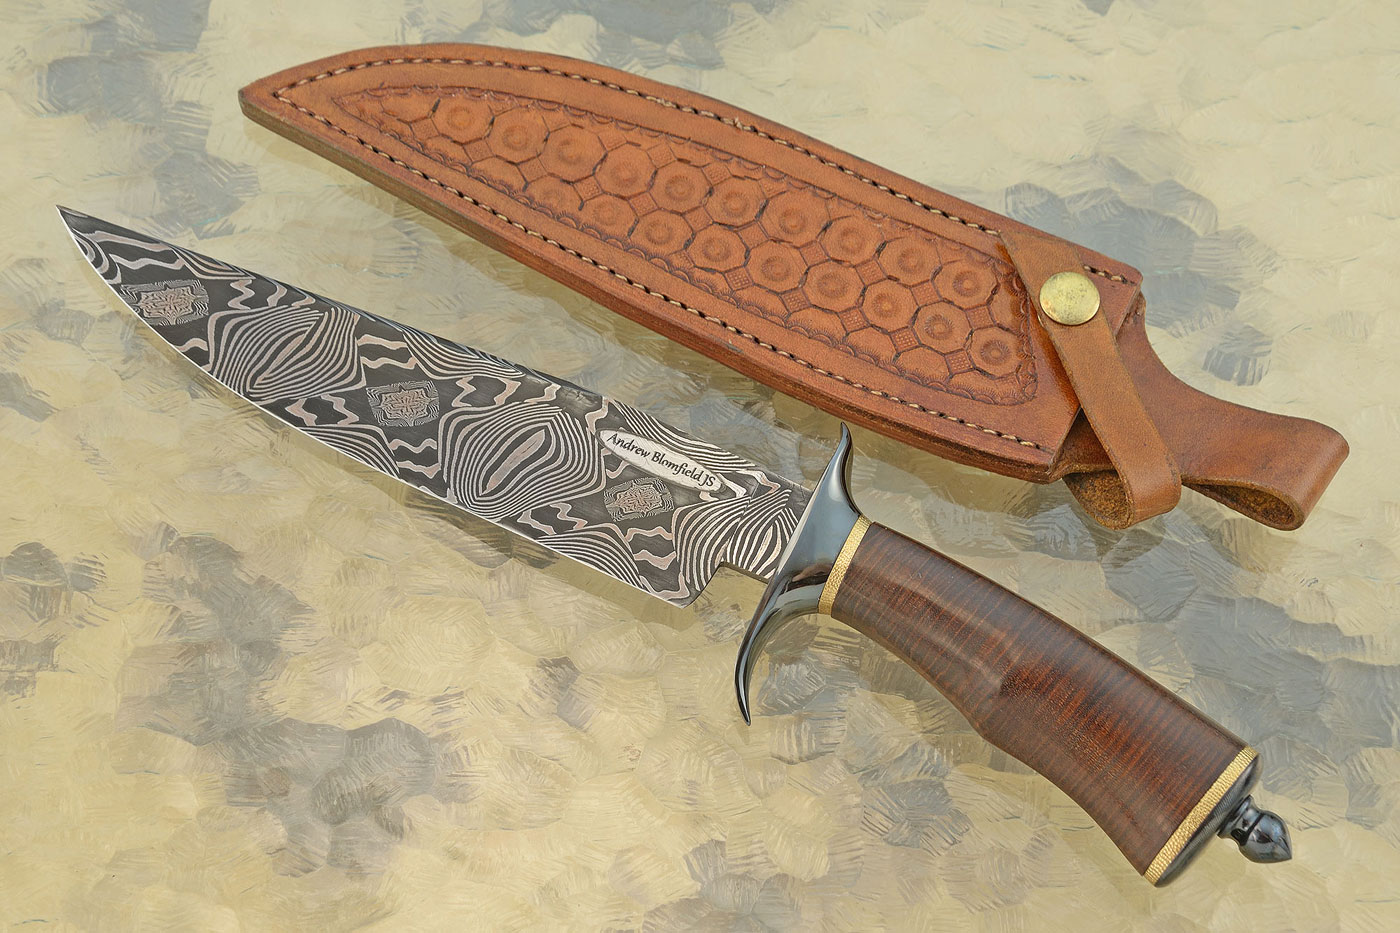 Mosaic Damascus S-Guard Camp Knife with Ringed Gidgee